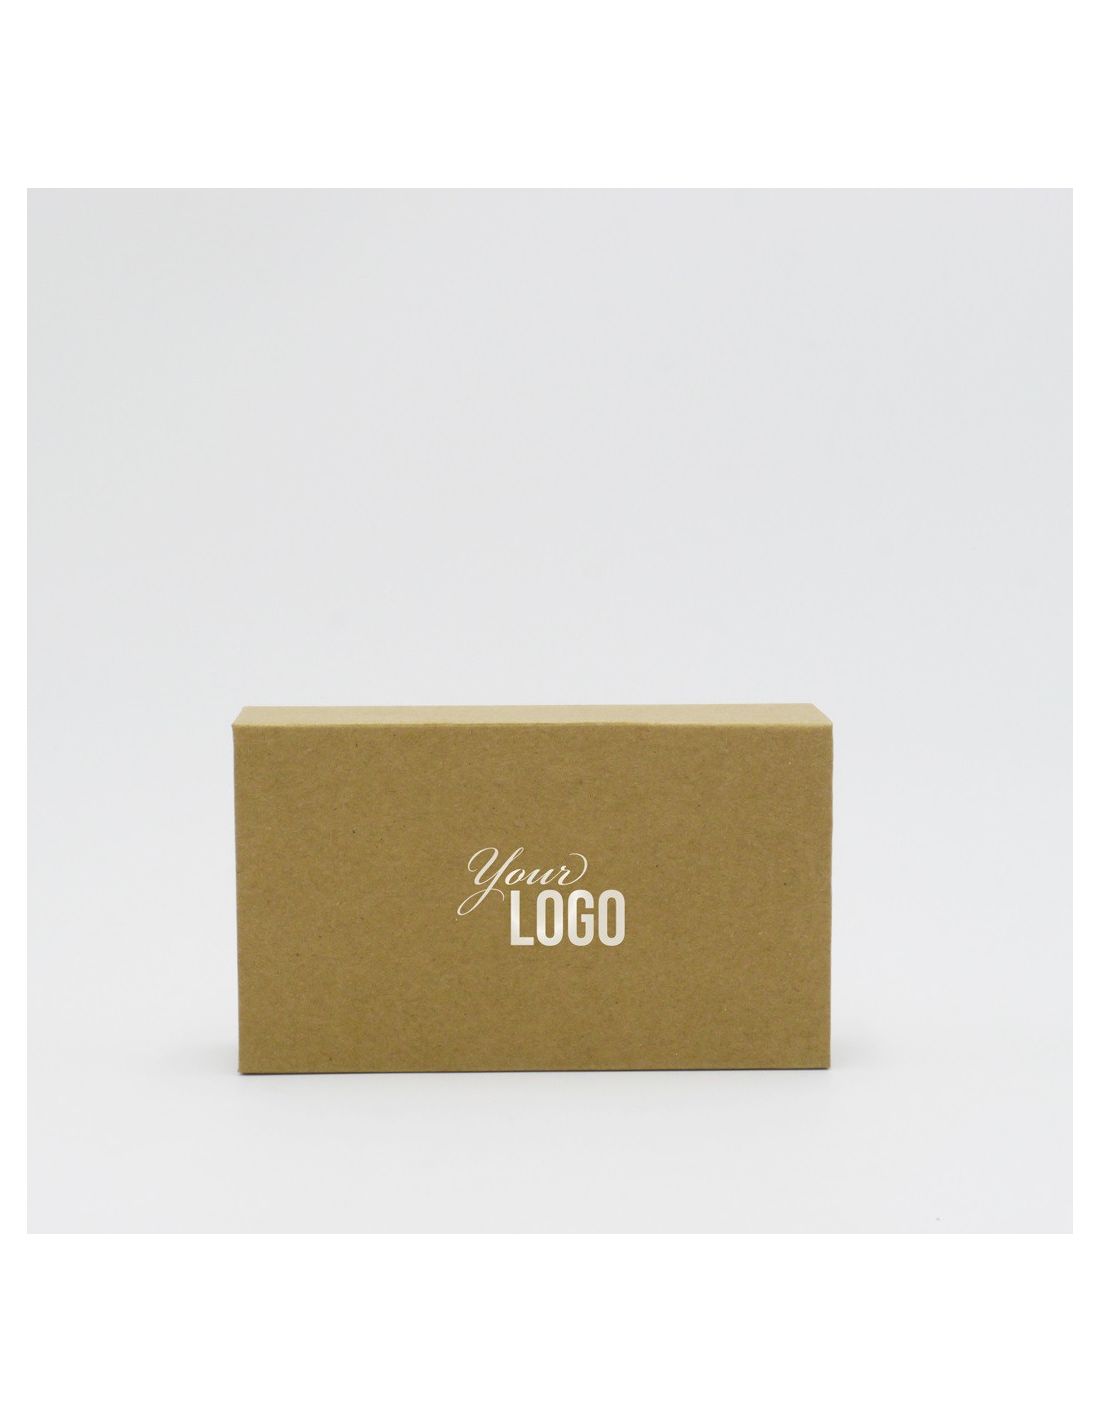 Customized Personalized Magnetic Box Hingbox 12x7x3 CM | HINGBOX | HOT FOIL STAMPING